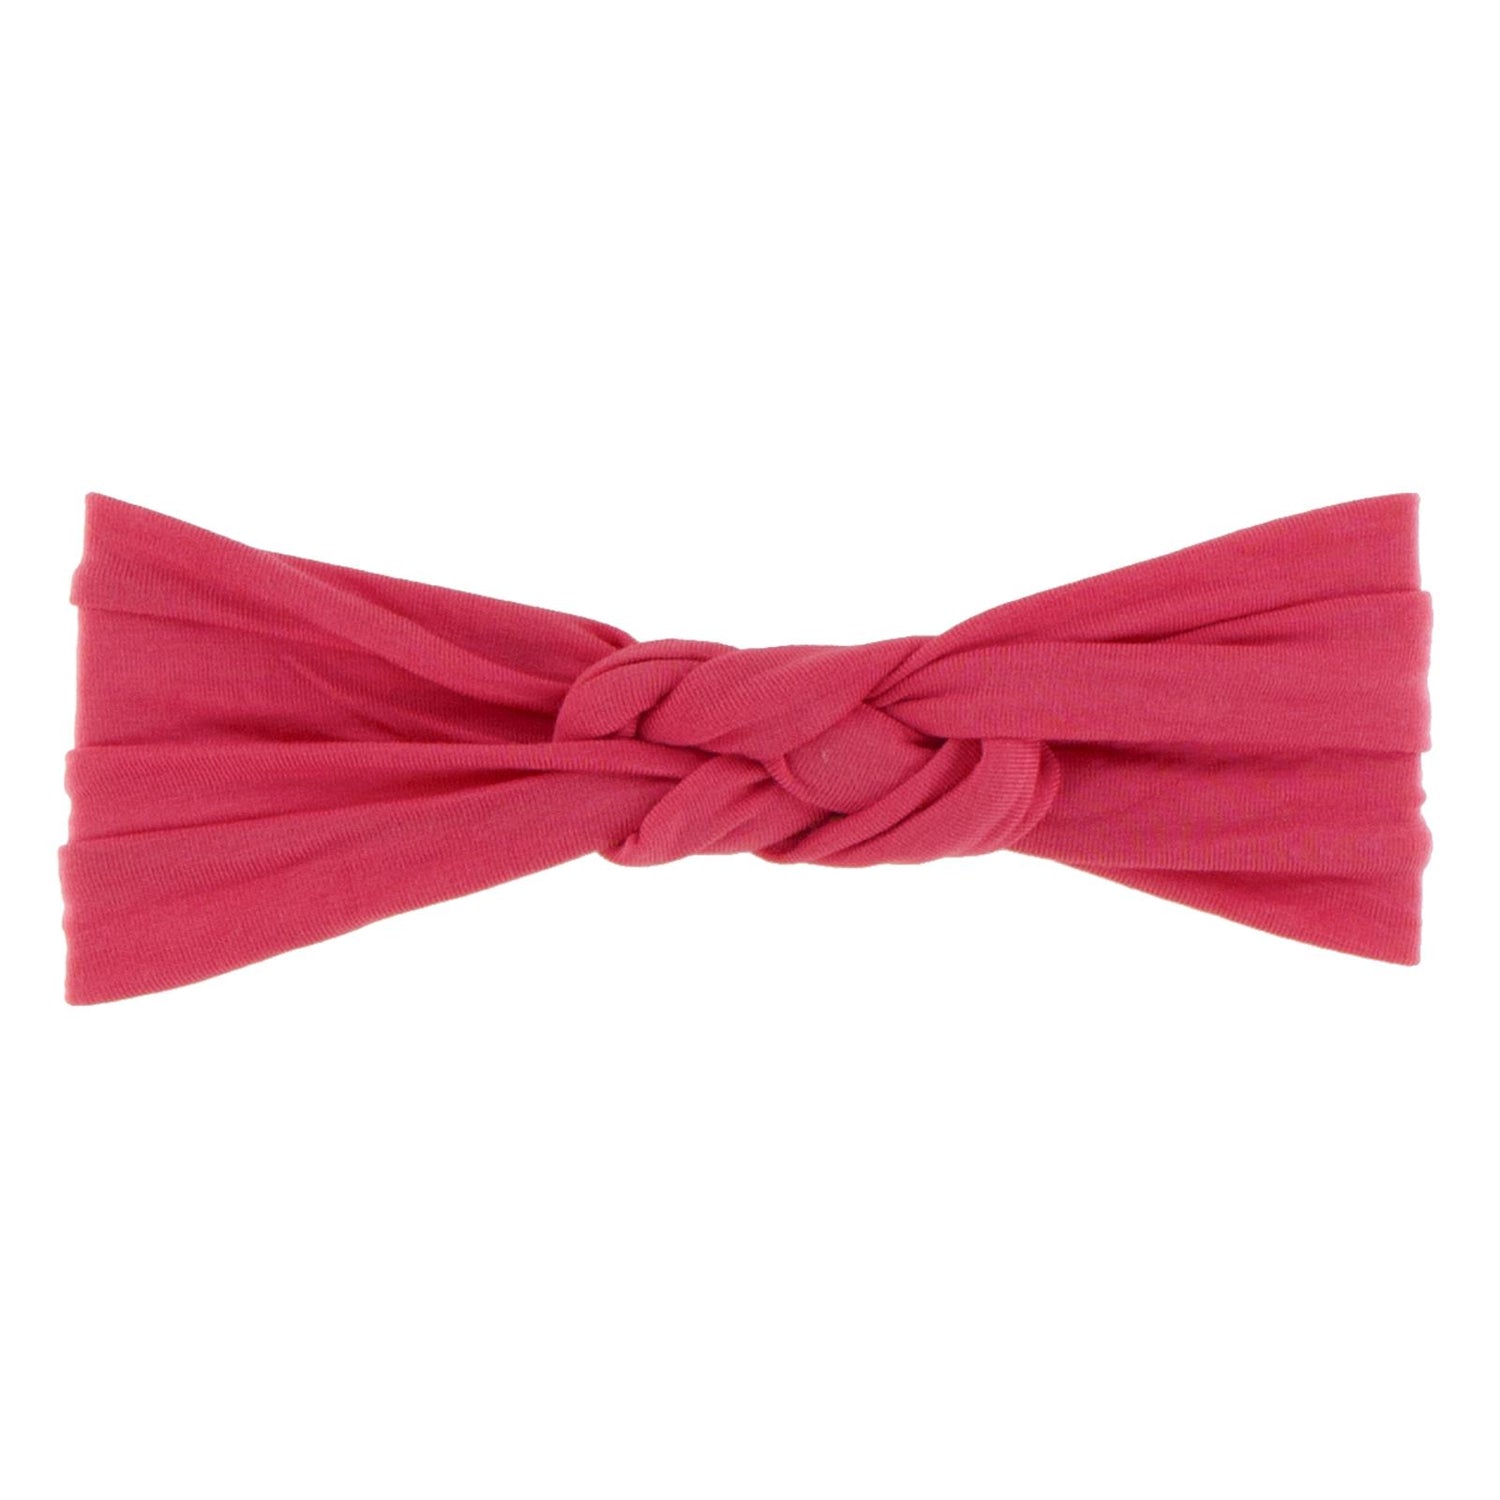 Knot Headband in Red Ginger